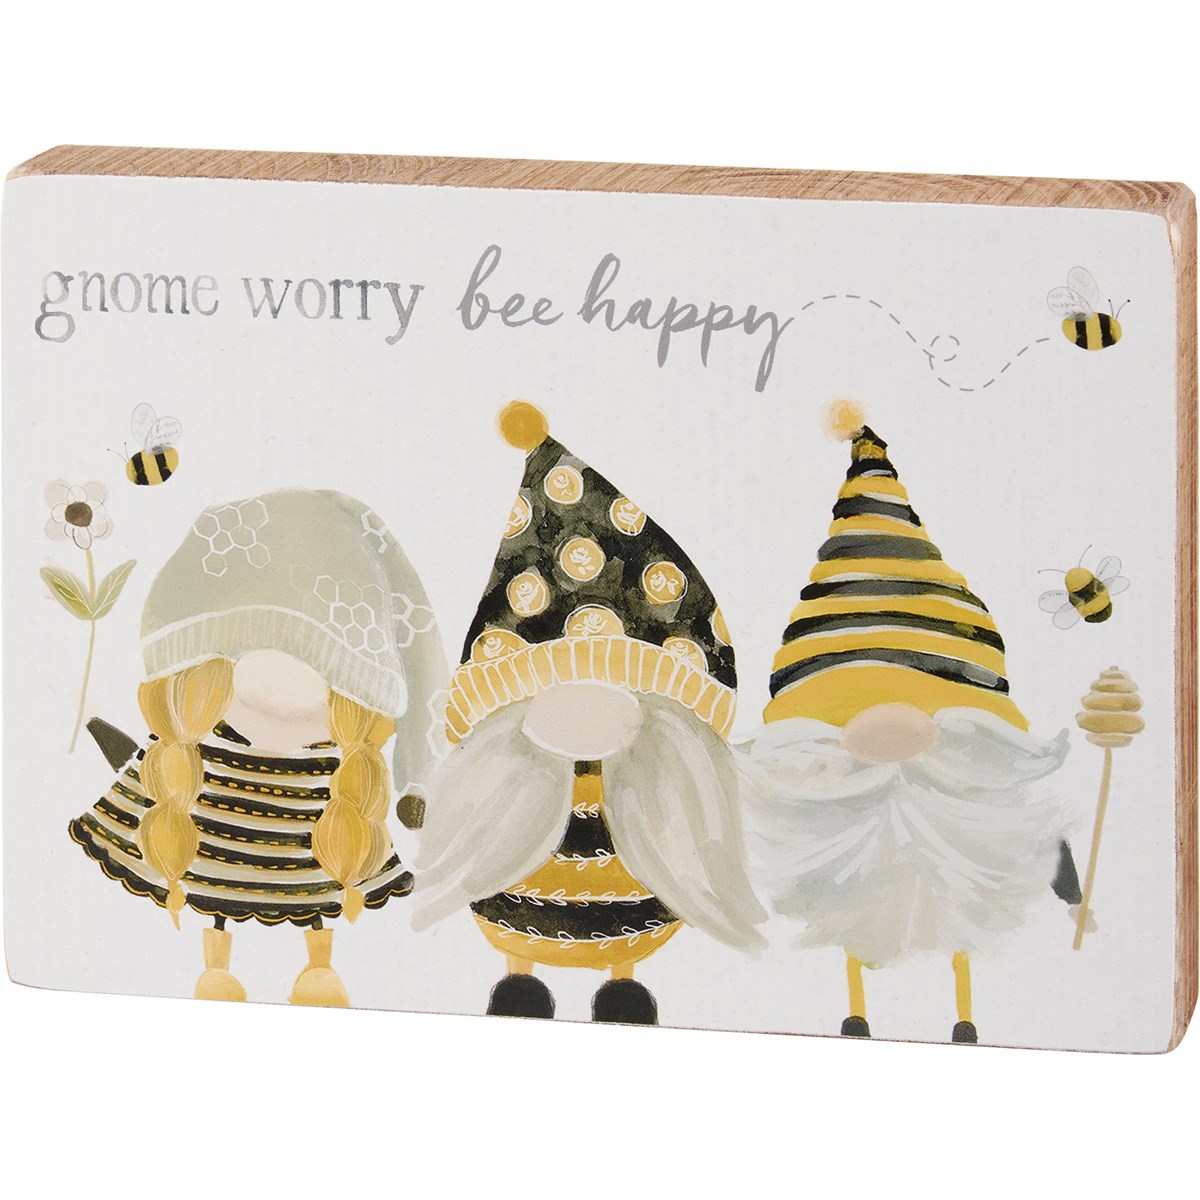 Gnome Worry Bee Happy Block Sign - Wood, Paper